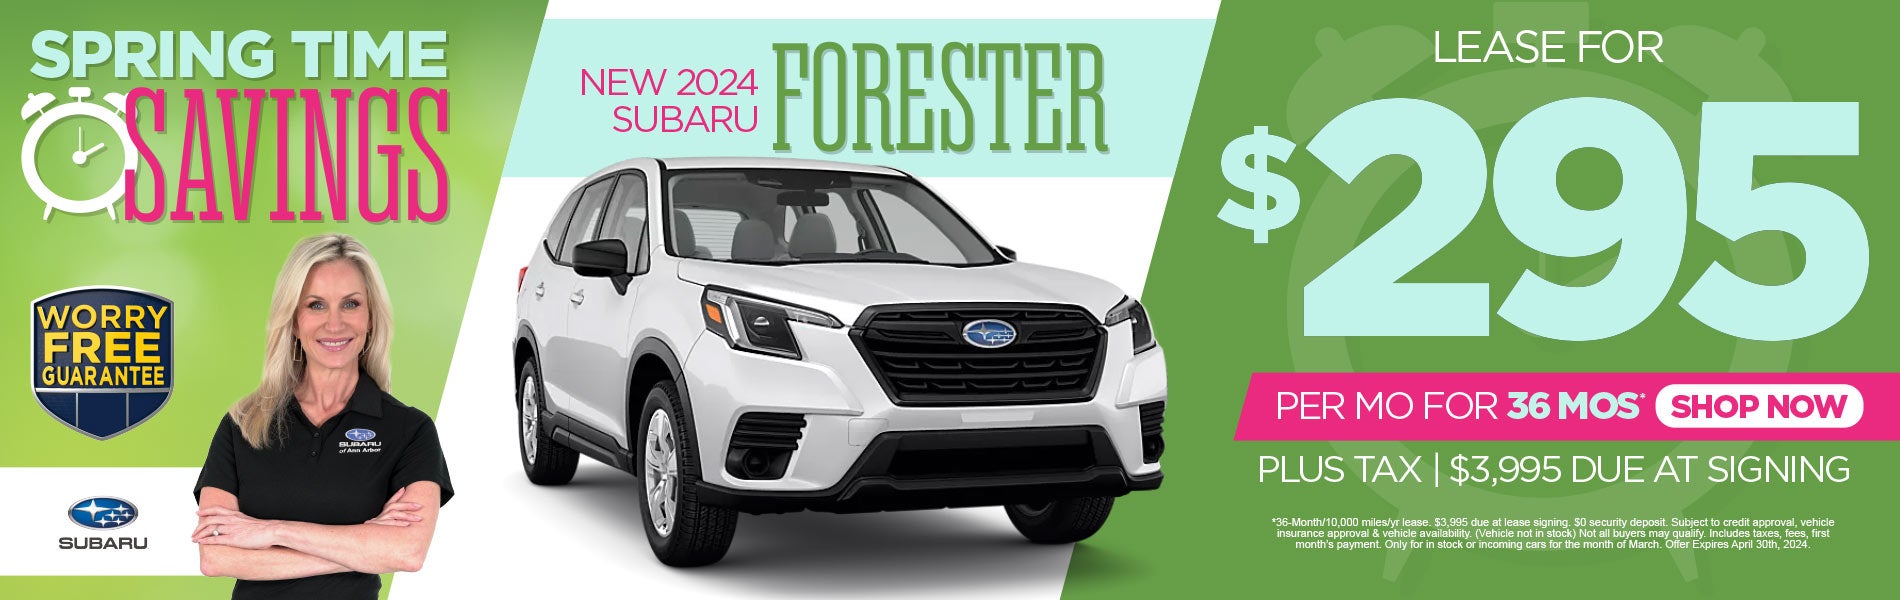 New 2024 Subaru Forester lease for $295/Mo*